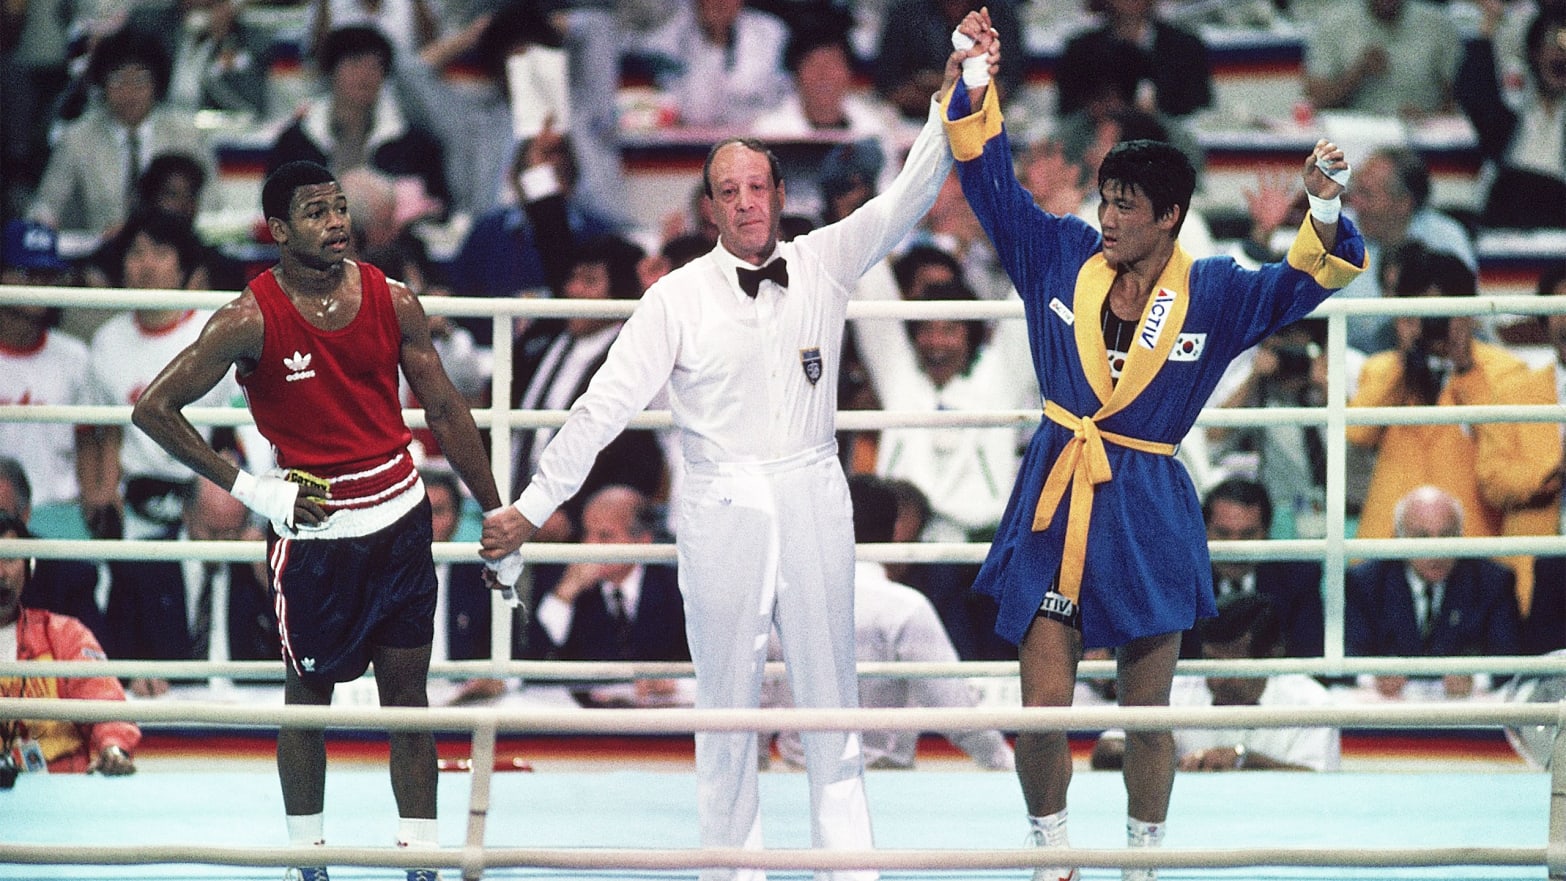 Referee raising Park Si-Hun's hand in victory after a controversial decision, despite Roy Jones Jr.'s clear dominance throughout the fight, capturing the surprise and disbelief in the arena.